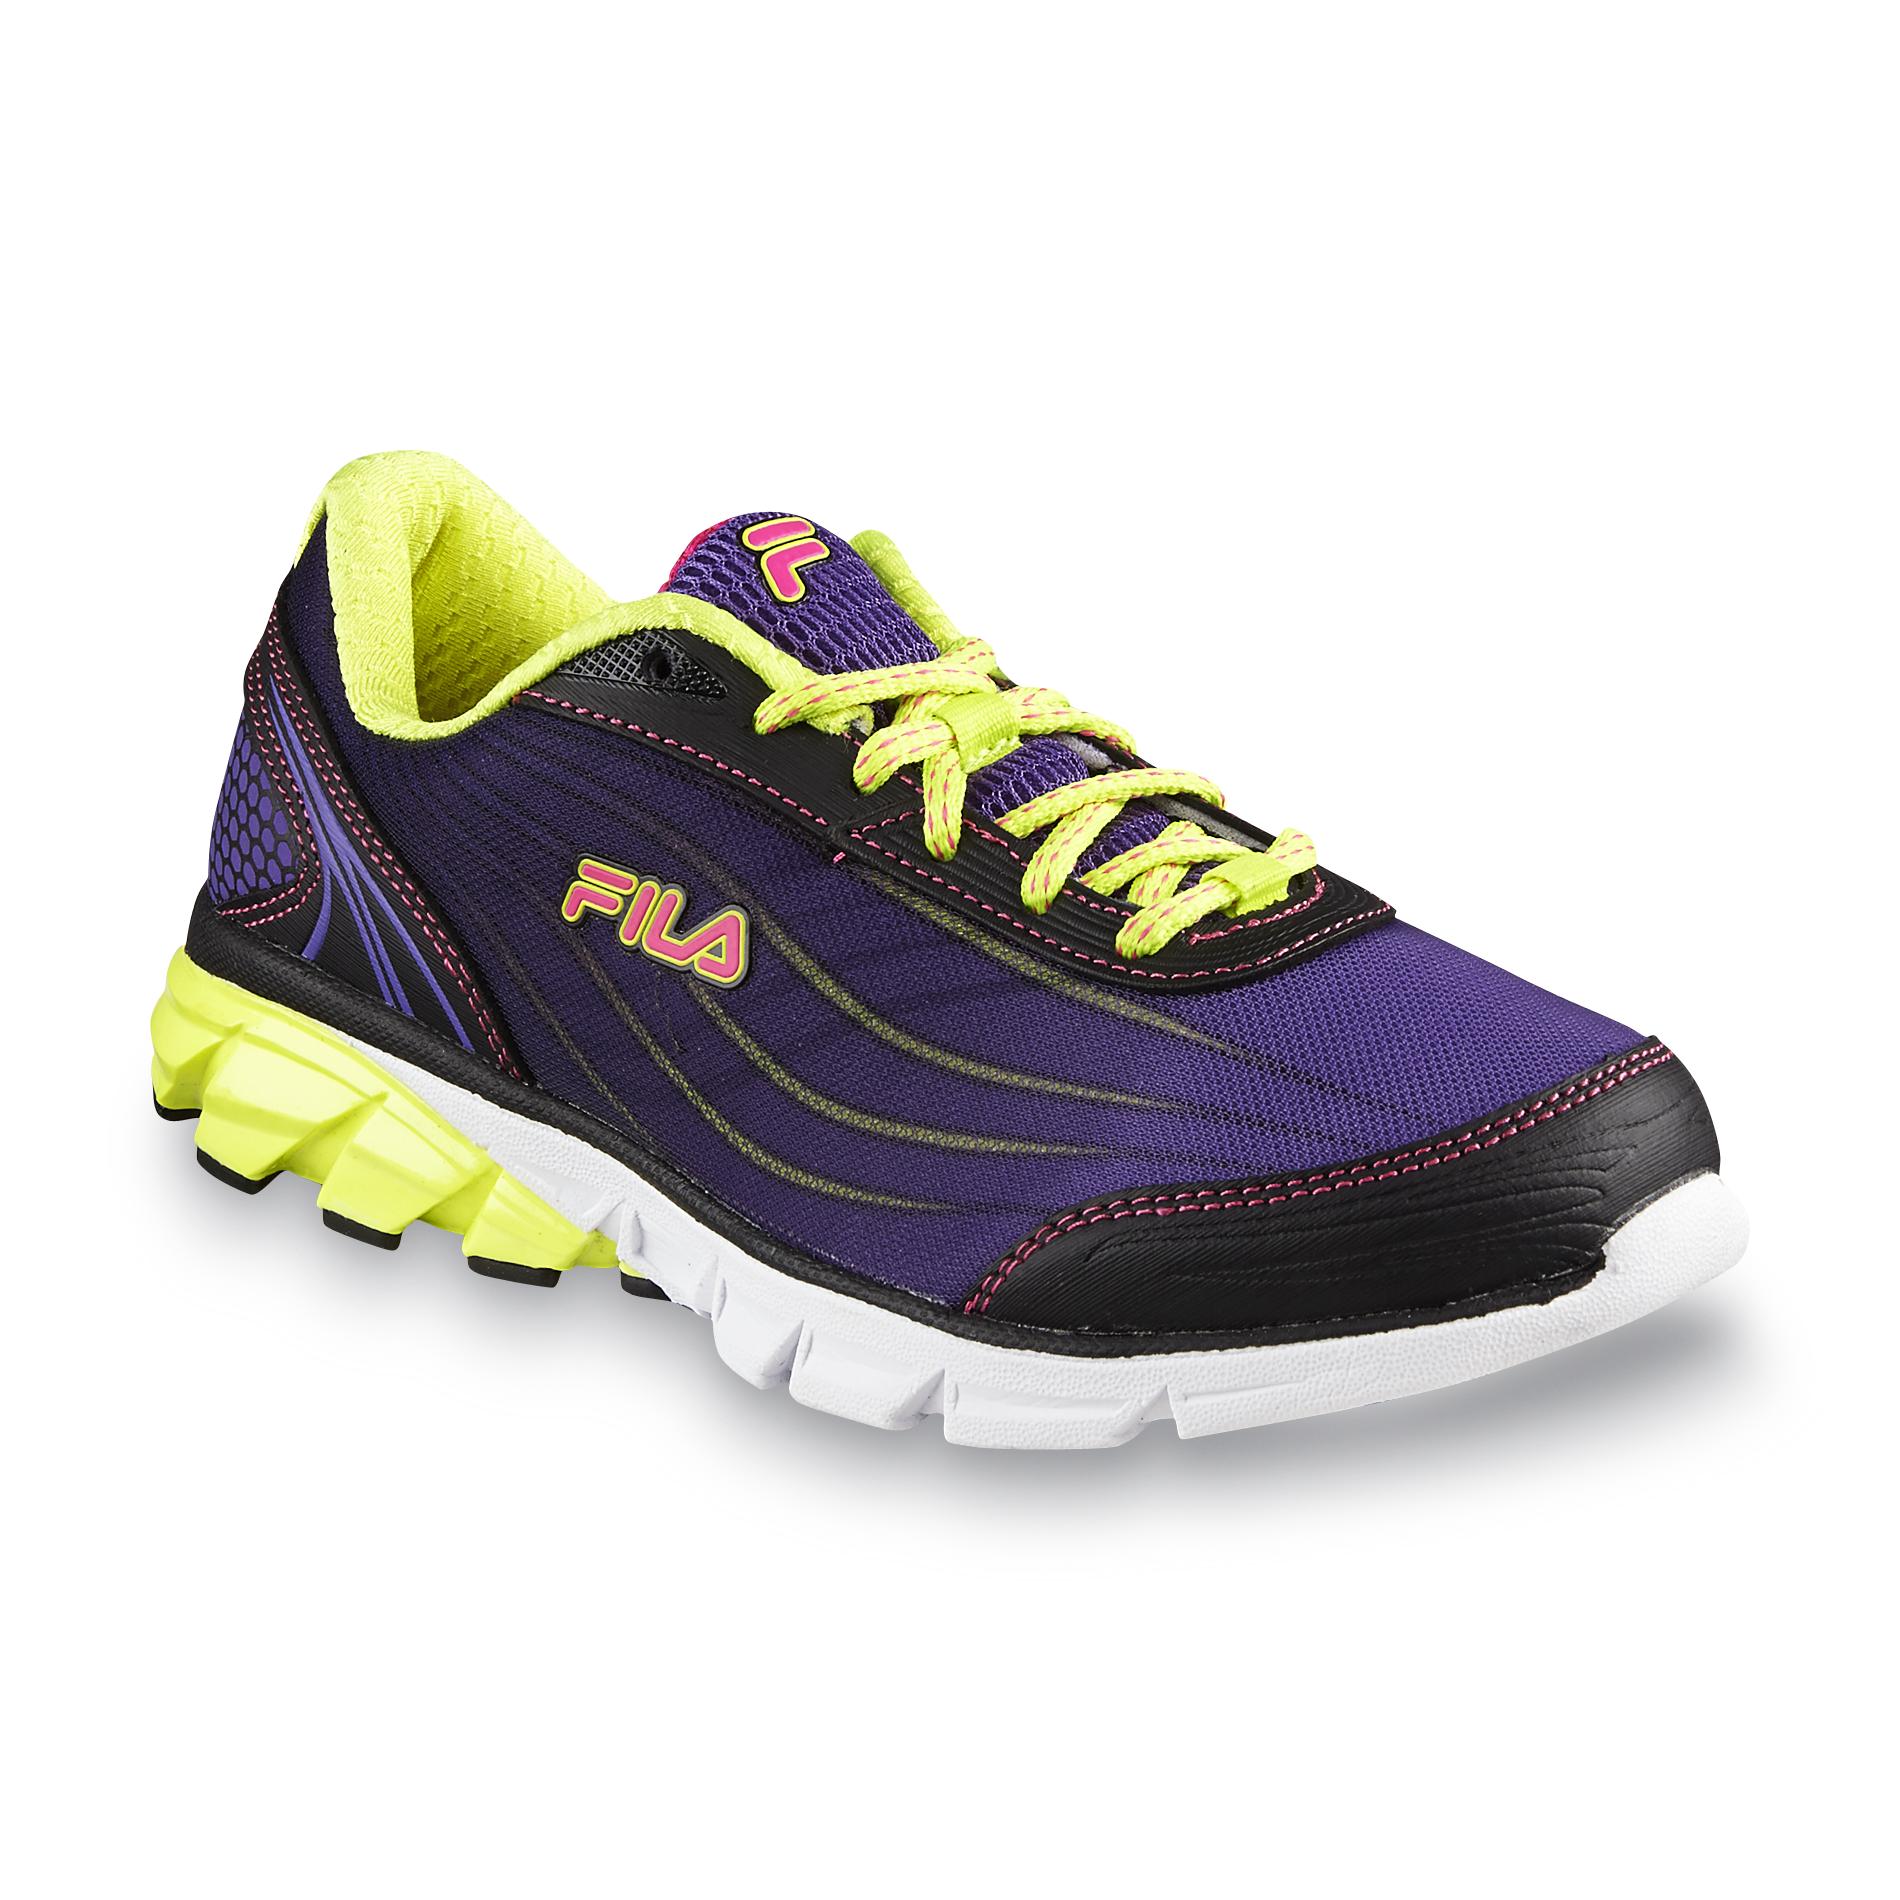 Fila Women's Head of the Pack Energized Athletic Shoe - Purple/Yellow